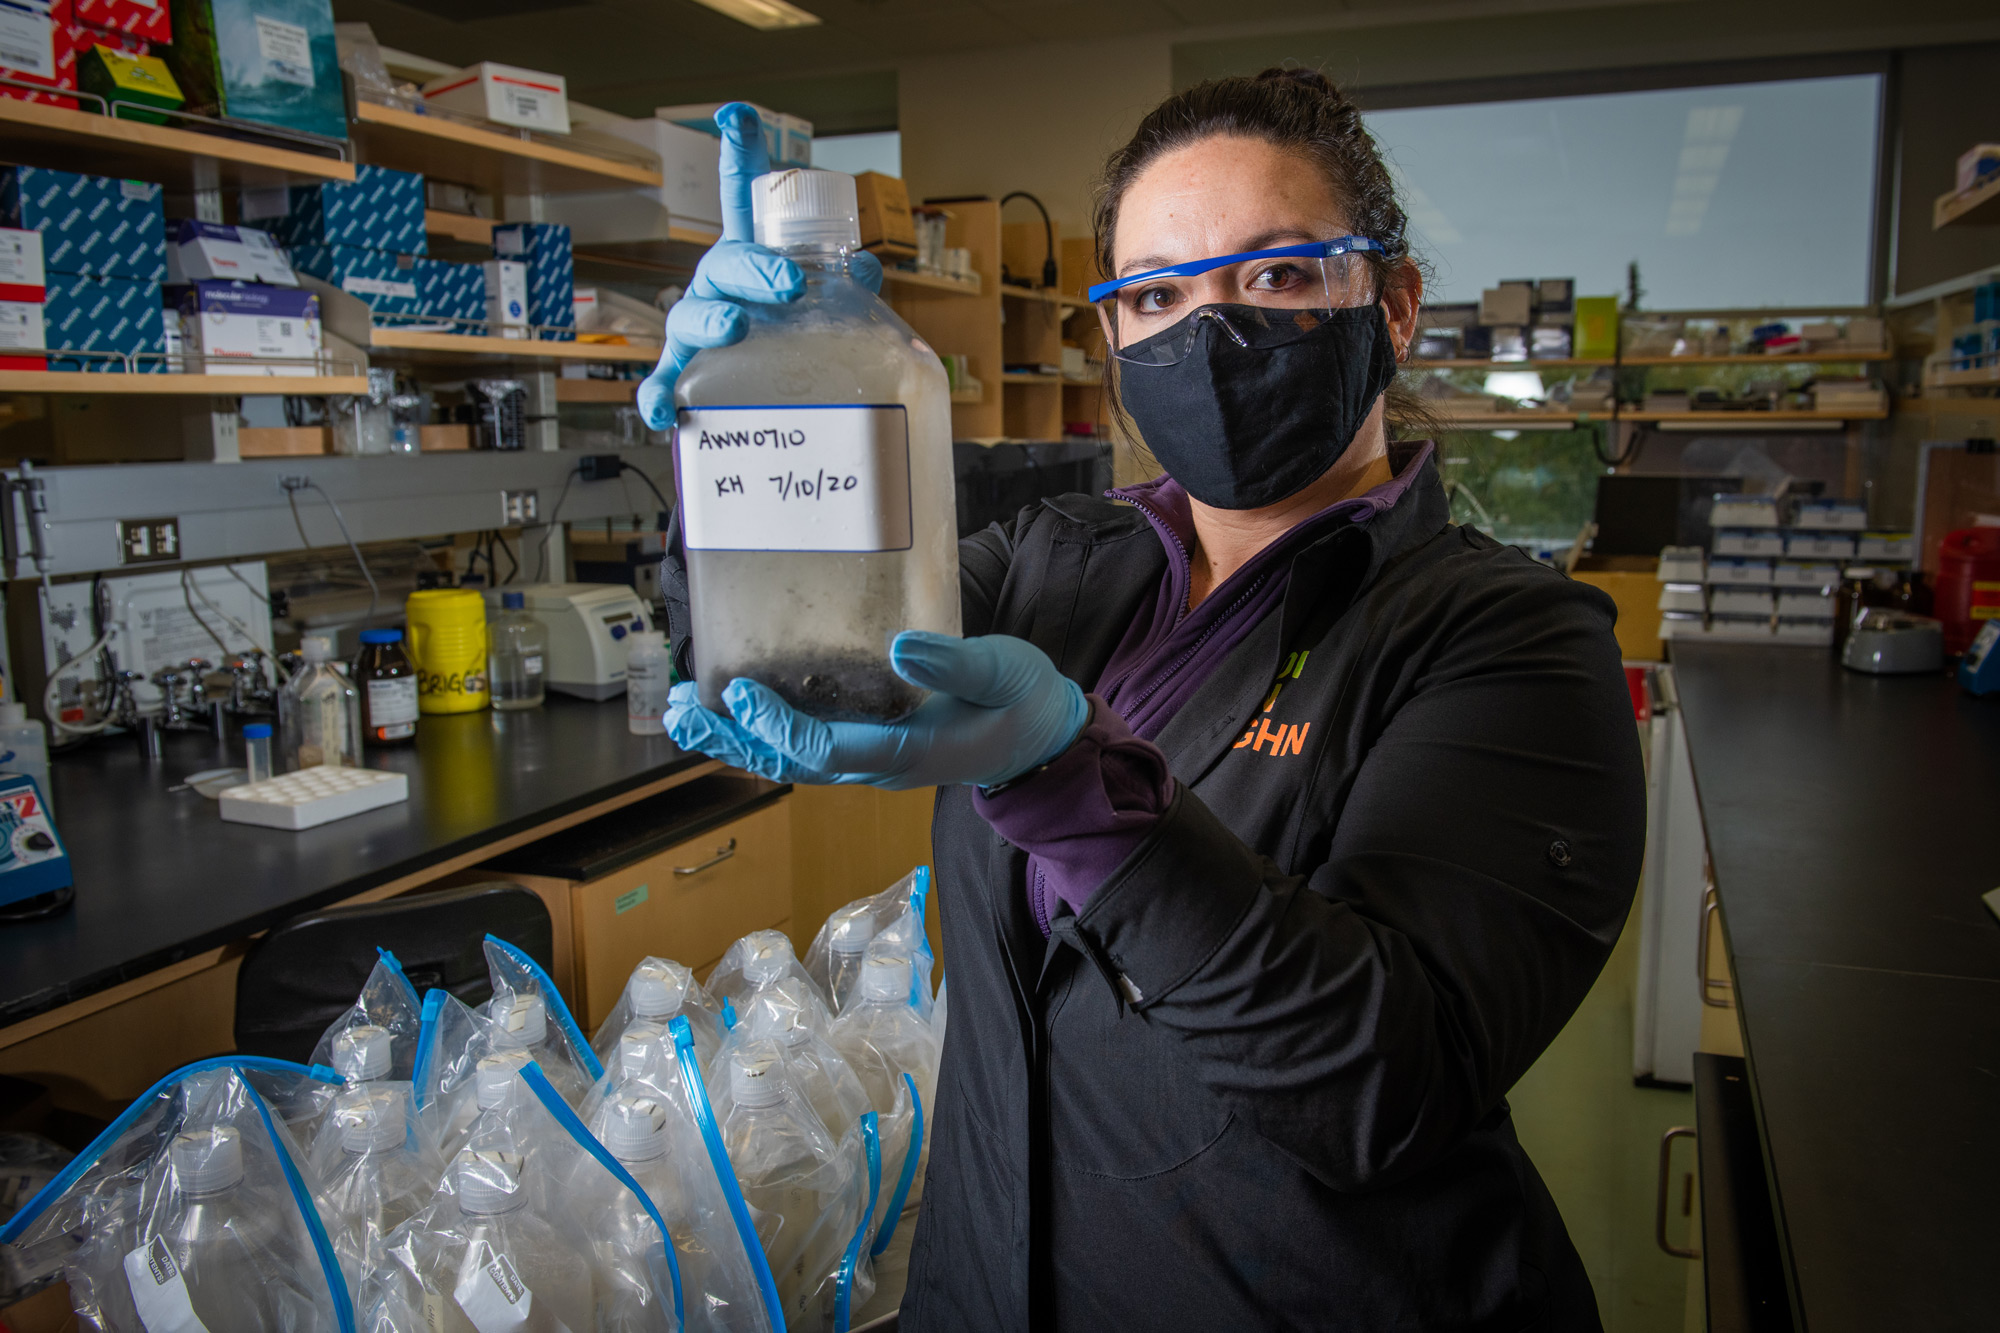 Biology and Natural Sciences Senior Kodi Haughn prepares samples of wastewater for COVID-19 testing in Professor Brandon Briggs' lab in UAA's ConocoPhillips Integrated Science Building. (Photo by James Evans / UAA)